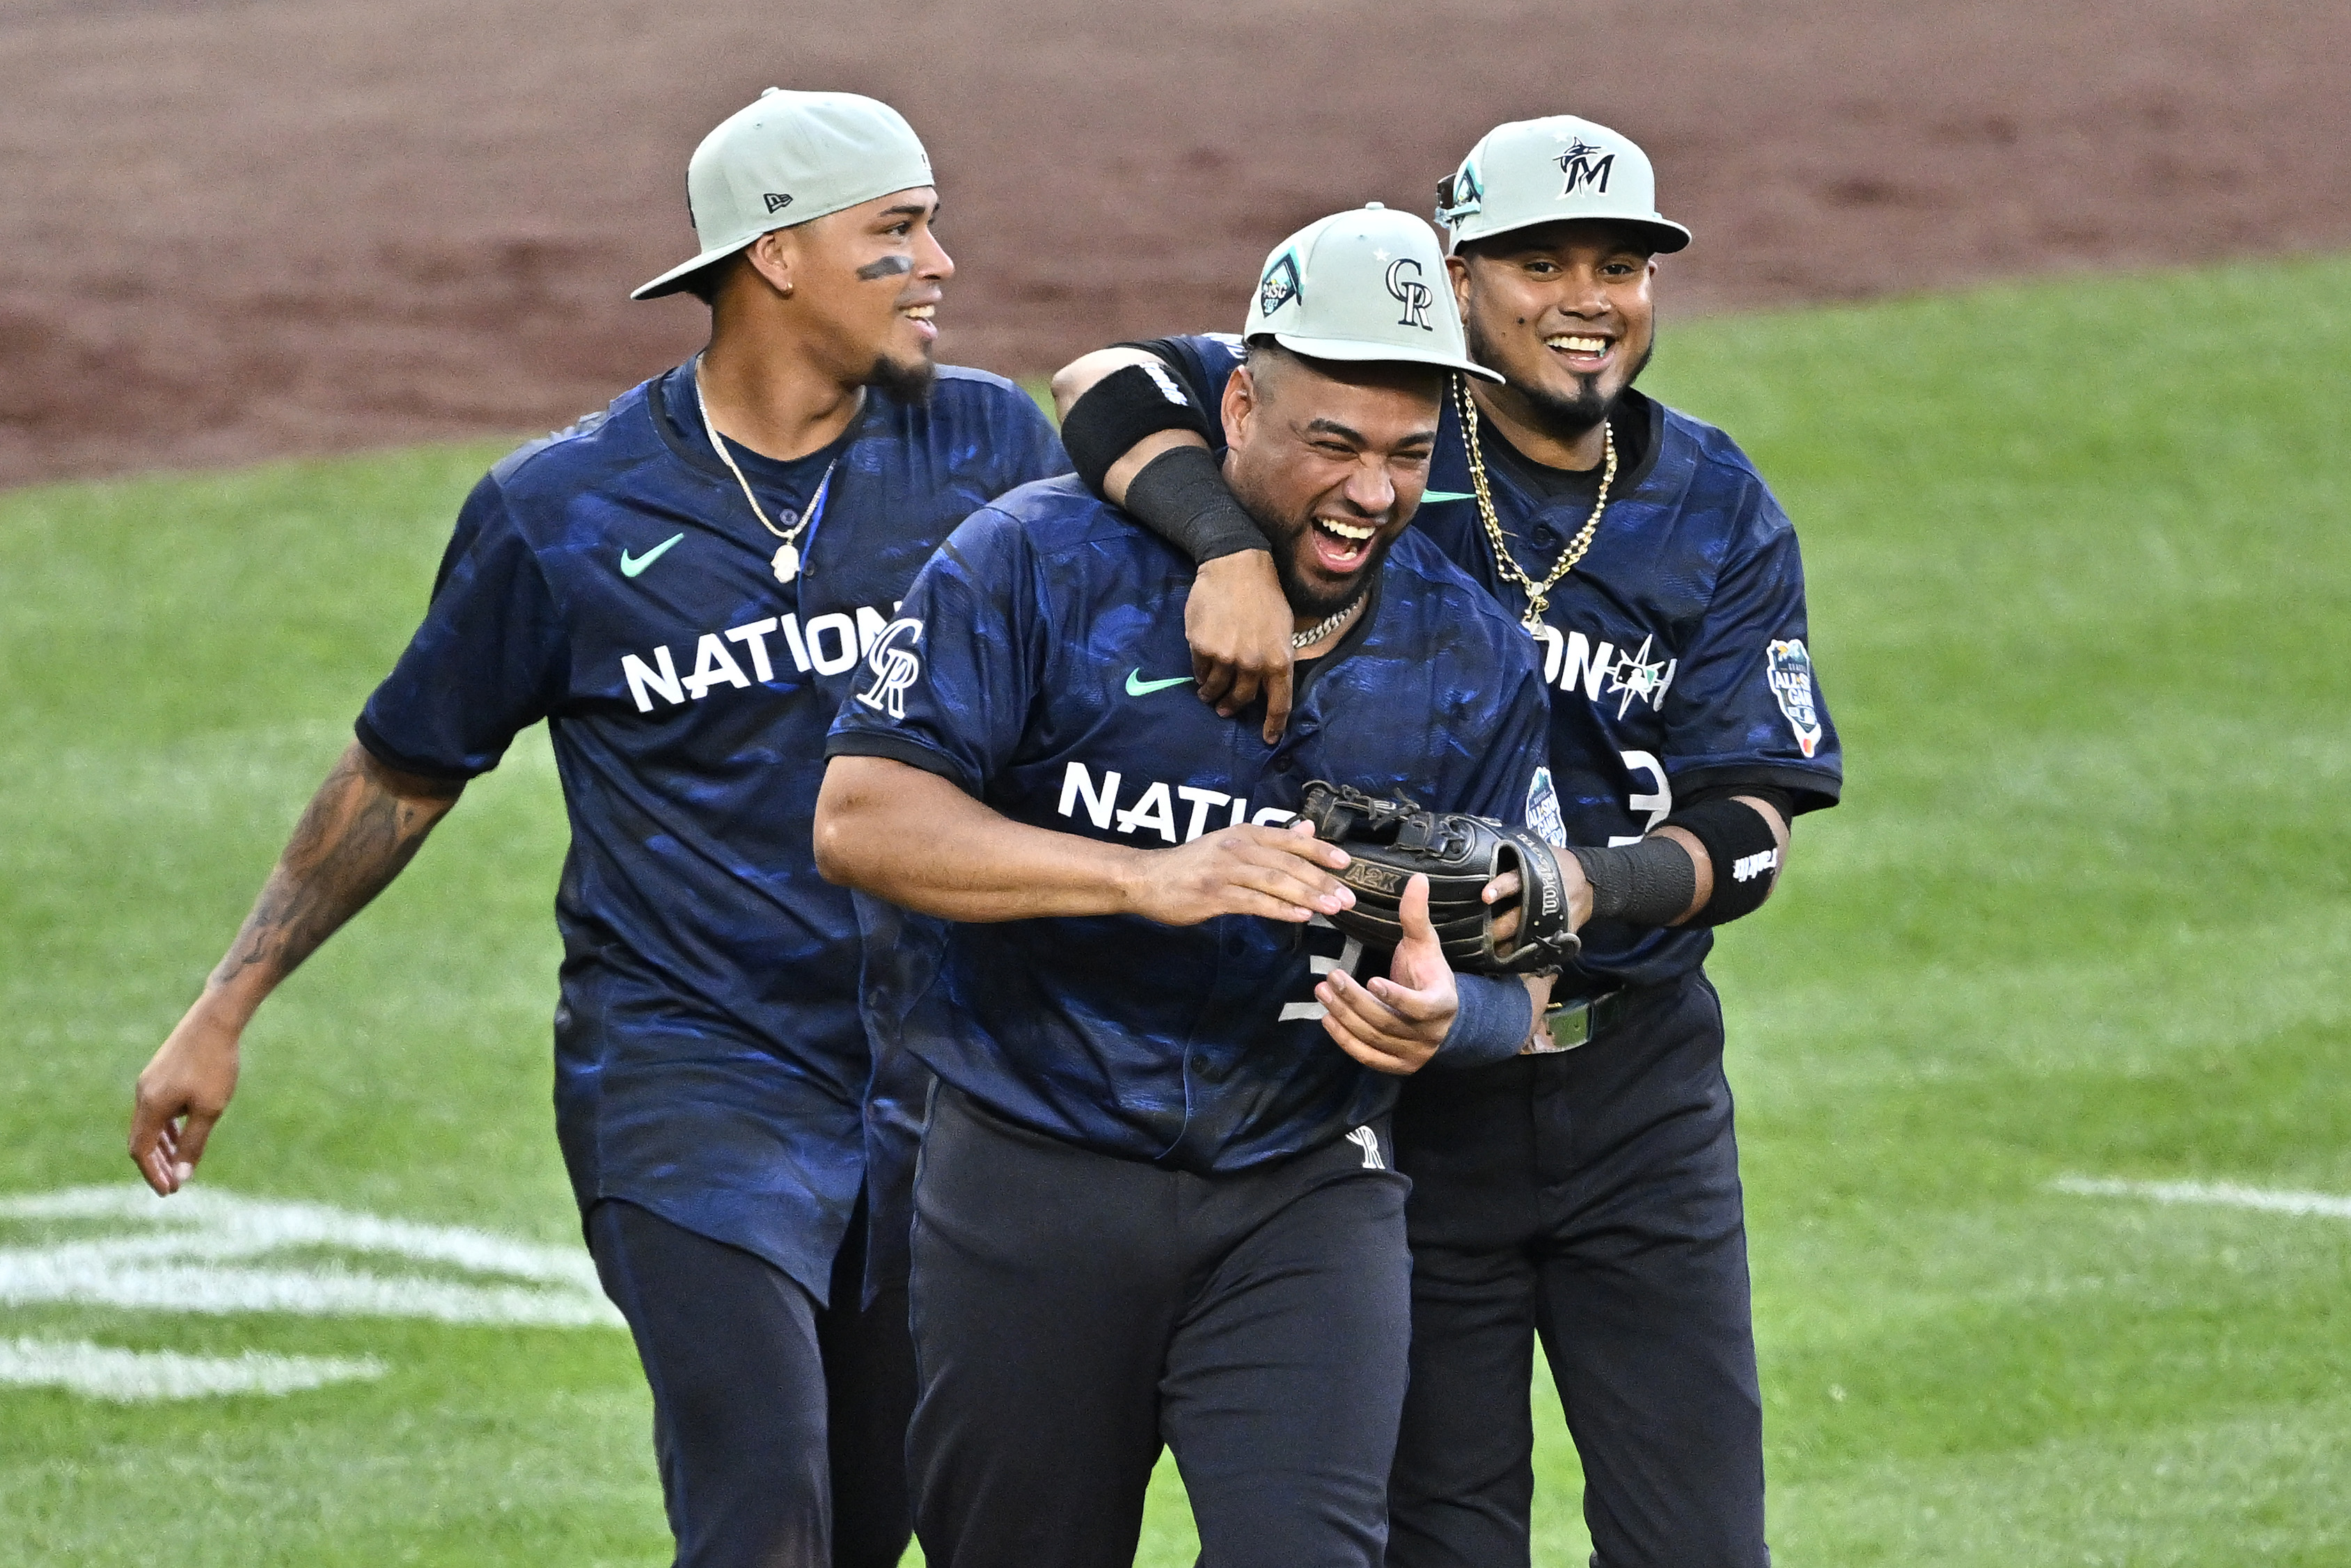 American League Defeats National League in MLB All-Star Game 3-2